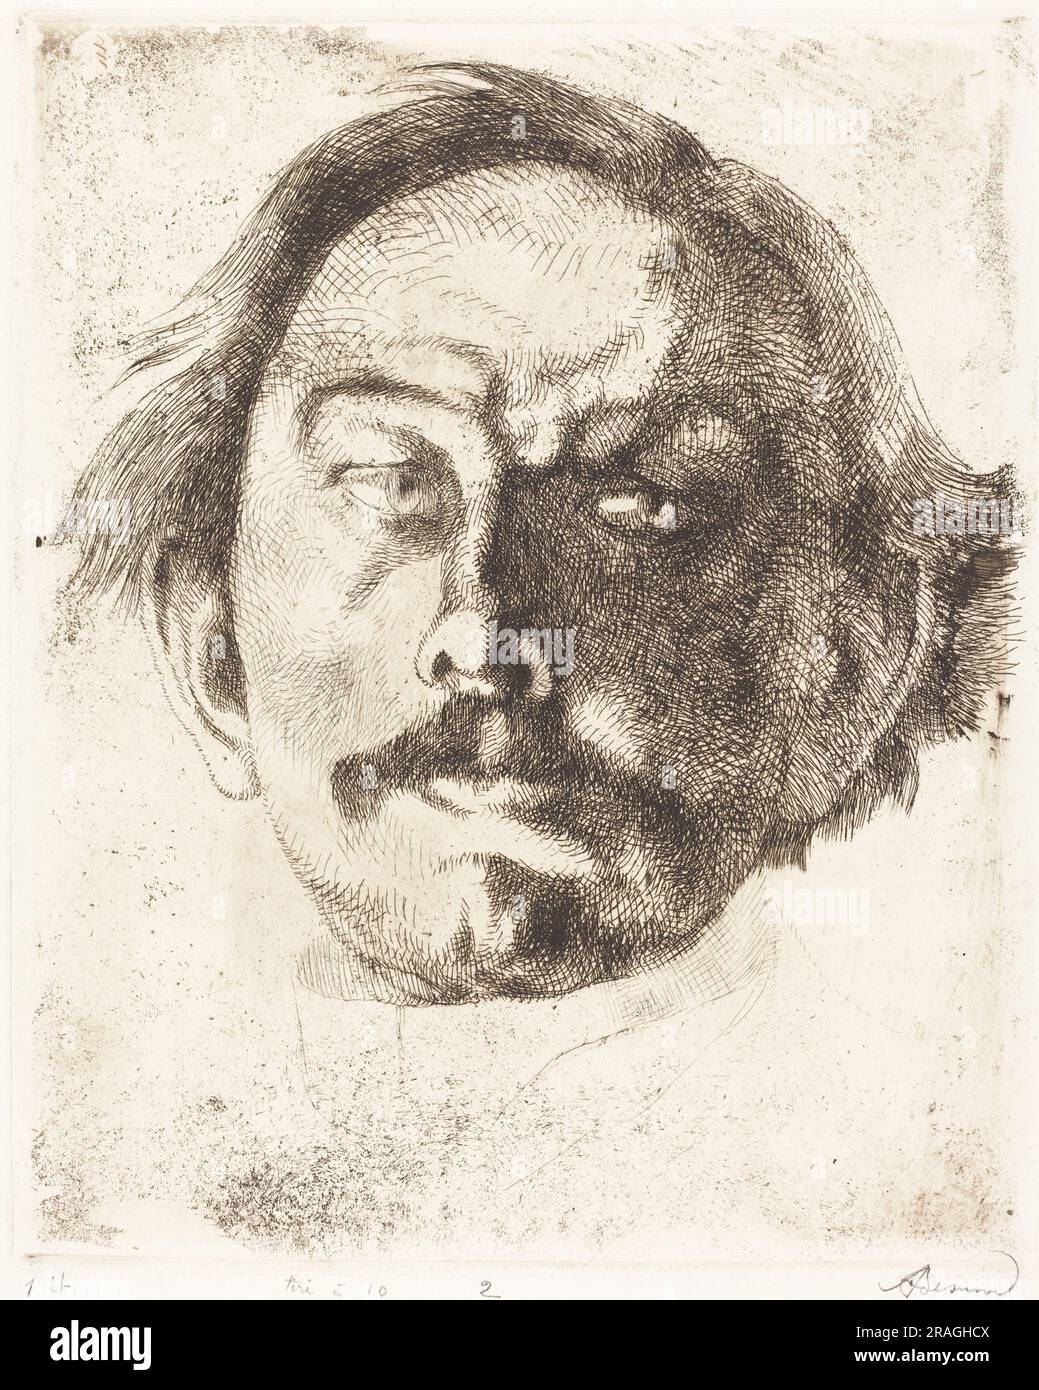 'Albert Besnard, Jules Destrée, 1917, etching in black on heavy white wove paper, plate: 30.7 x 24.9 cm (12 1/16 x 9 13/16 in.) sheet: 48.6 x 33.1 cm (19 1/8 x 13 1/16 in.), Gift of Mr. and Mrs. Daniel Bell, 1993.71.9' Stock Photo